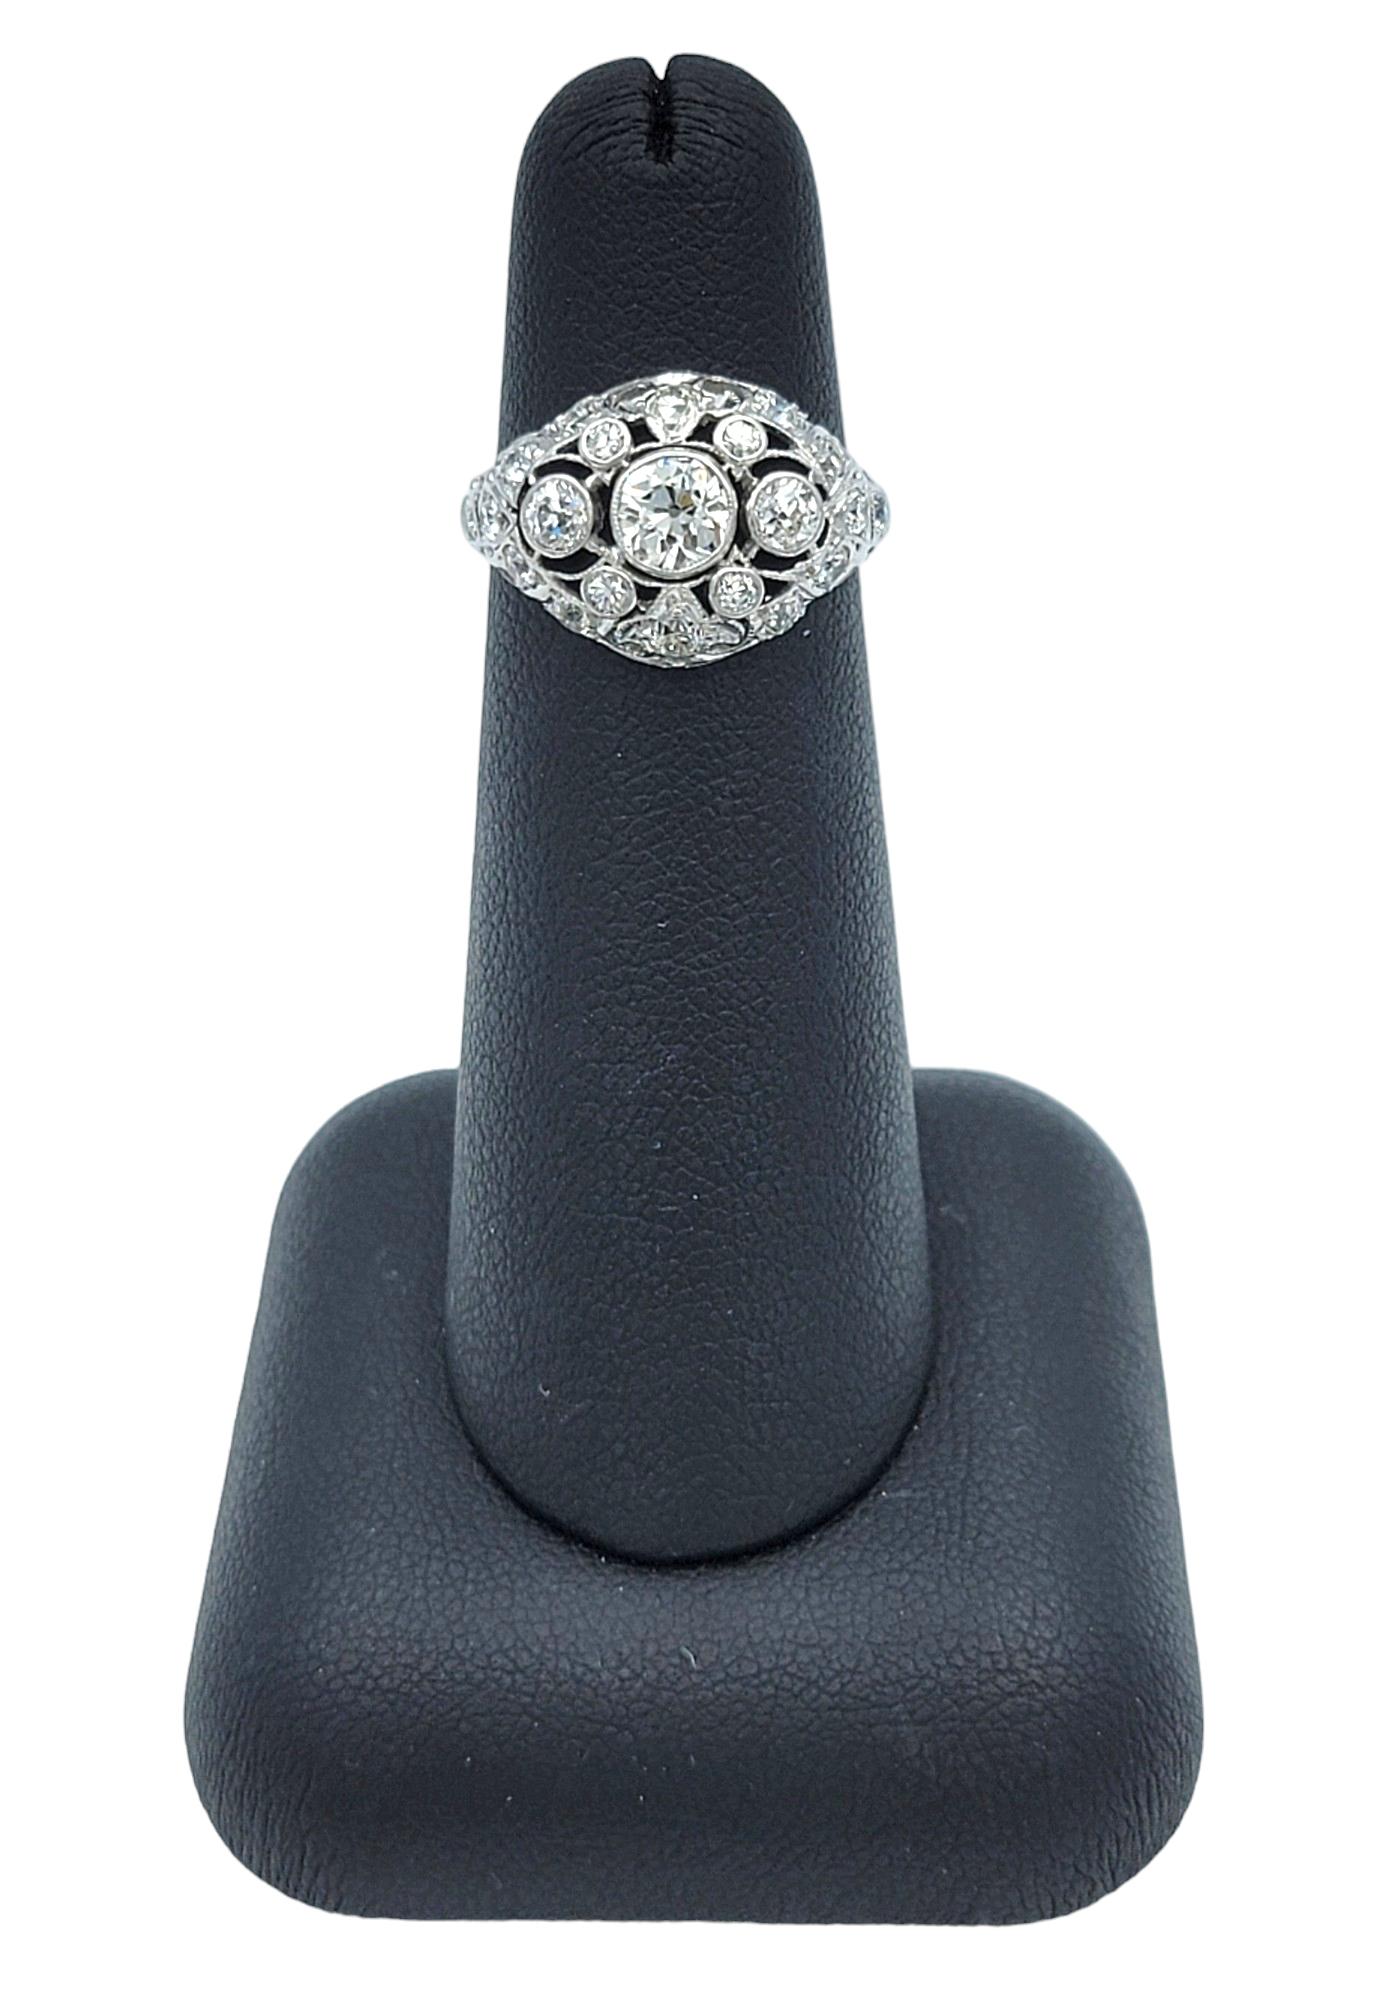 Vintage Cluster Round Diamond Dome Cocktail Ring Set in 14 Karat White Gold For Sale 1